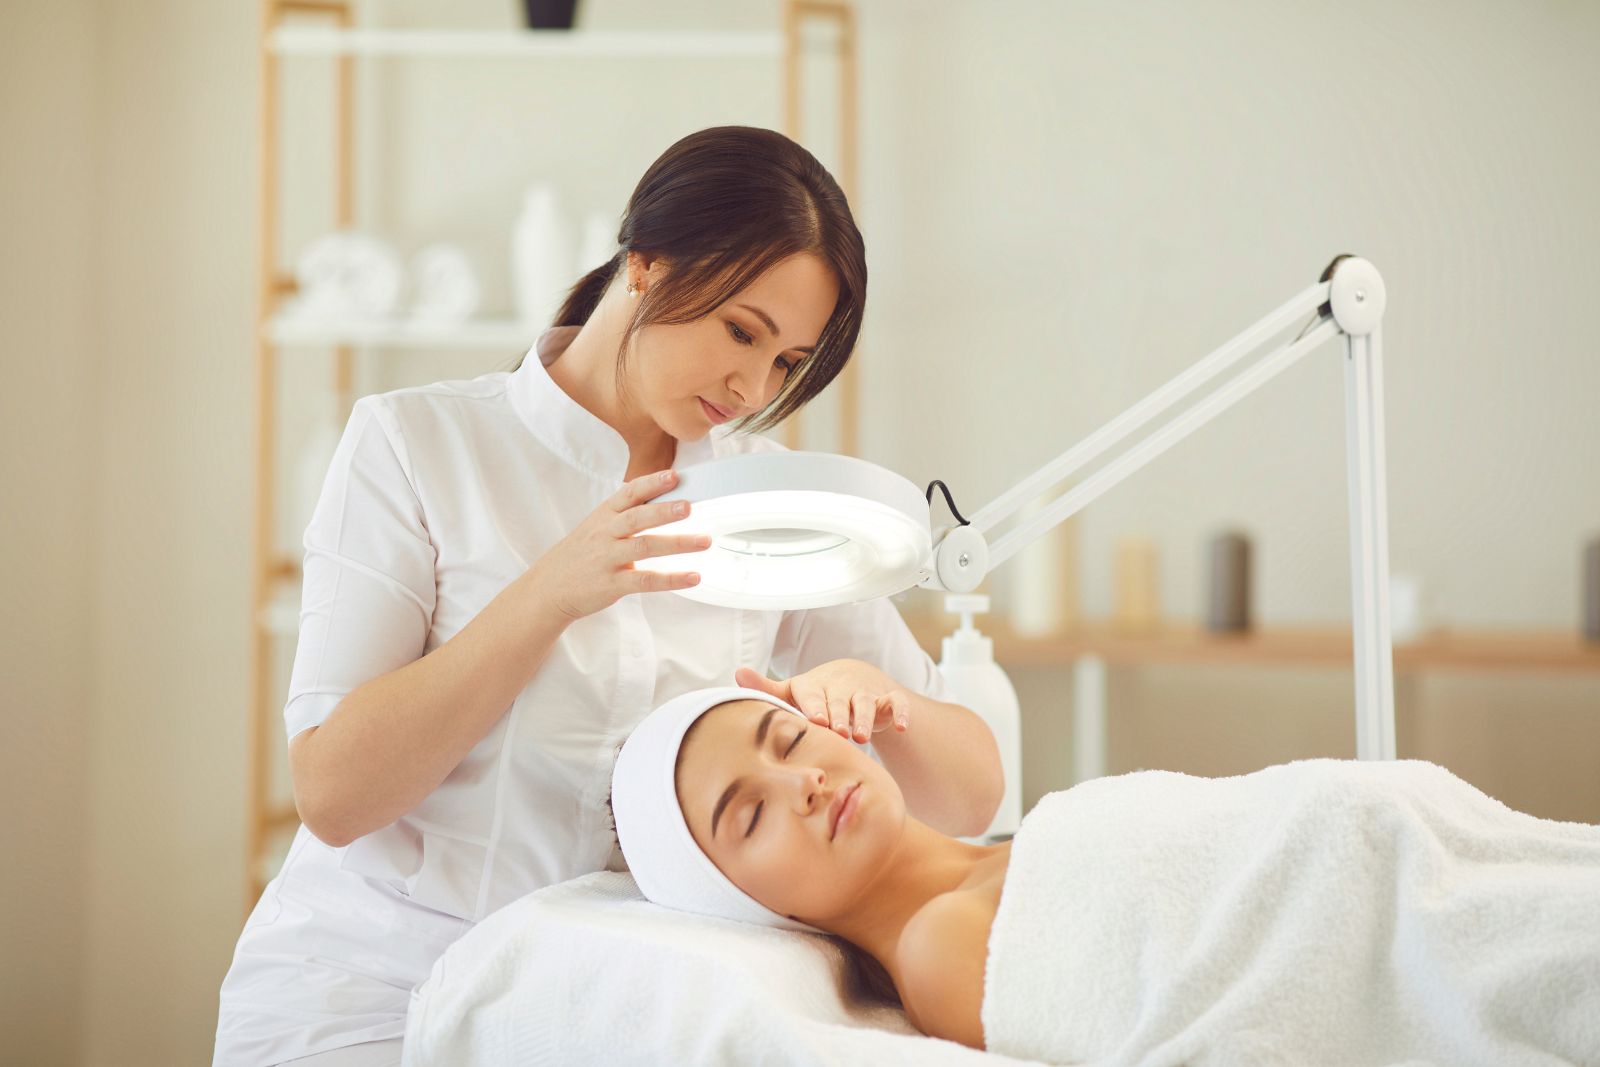 A female beautician using a magnifying lamp to examine a female client's skin during a facial treatment in a serene spa setting.